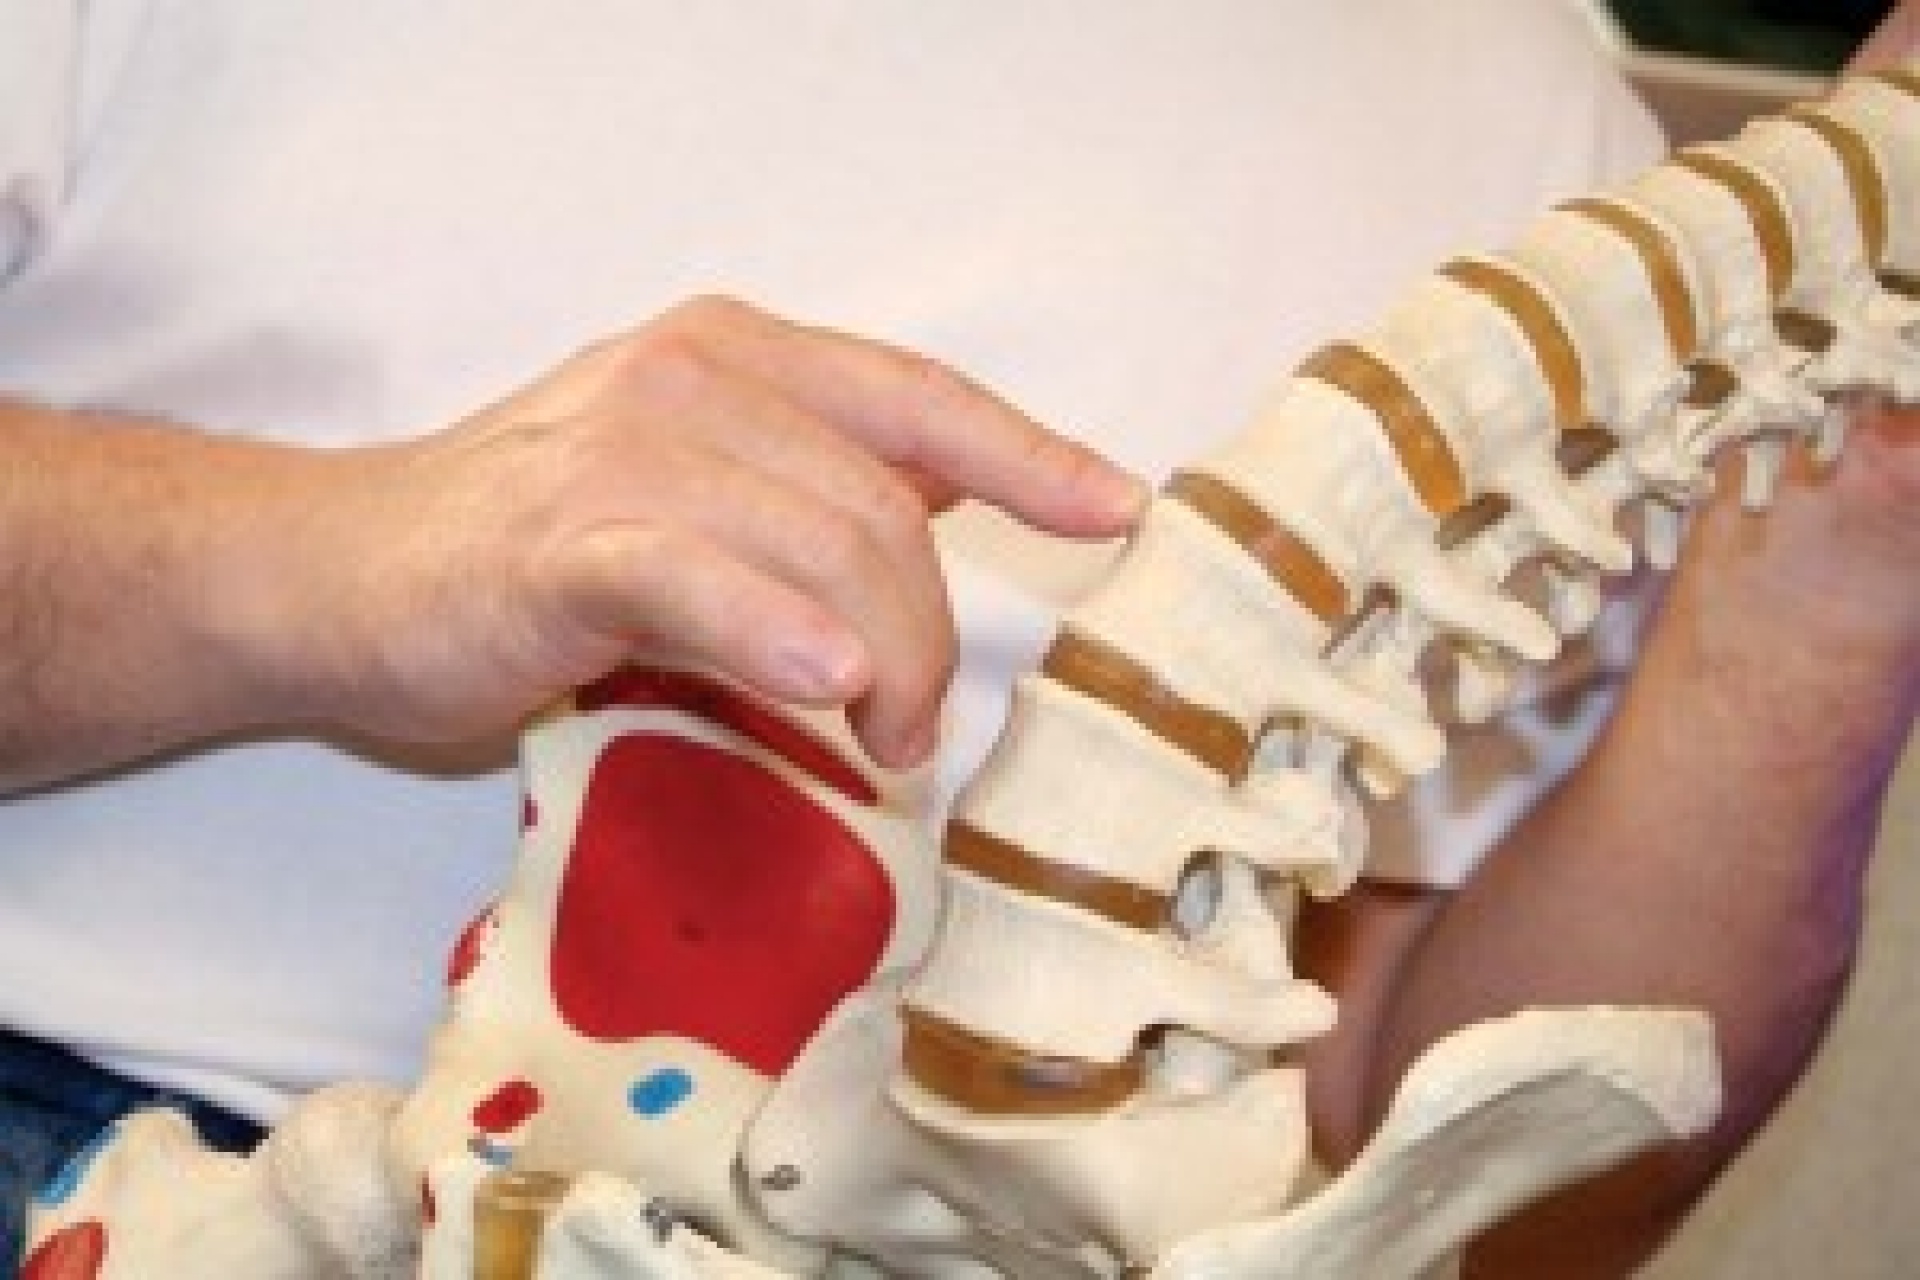 Low back pain and disc injury--